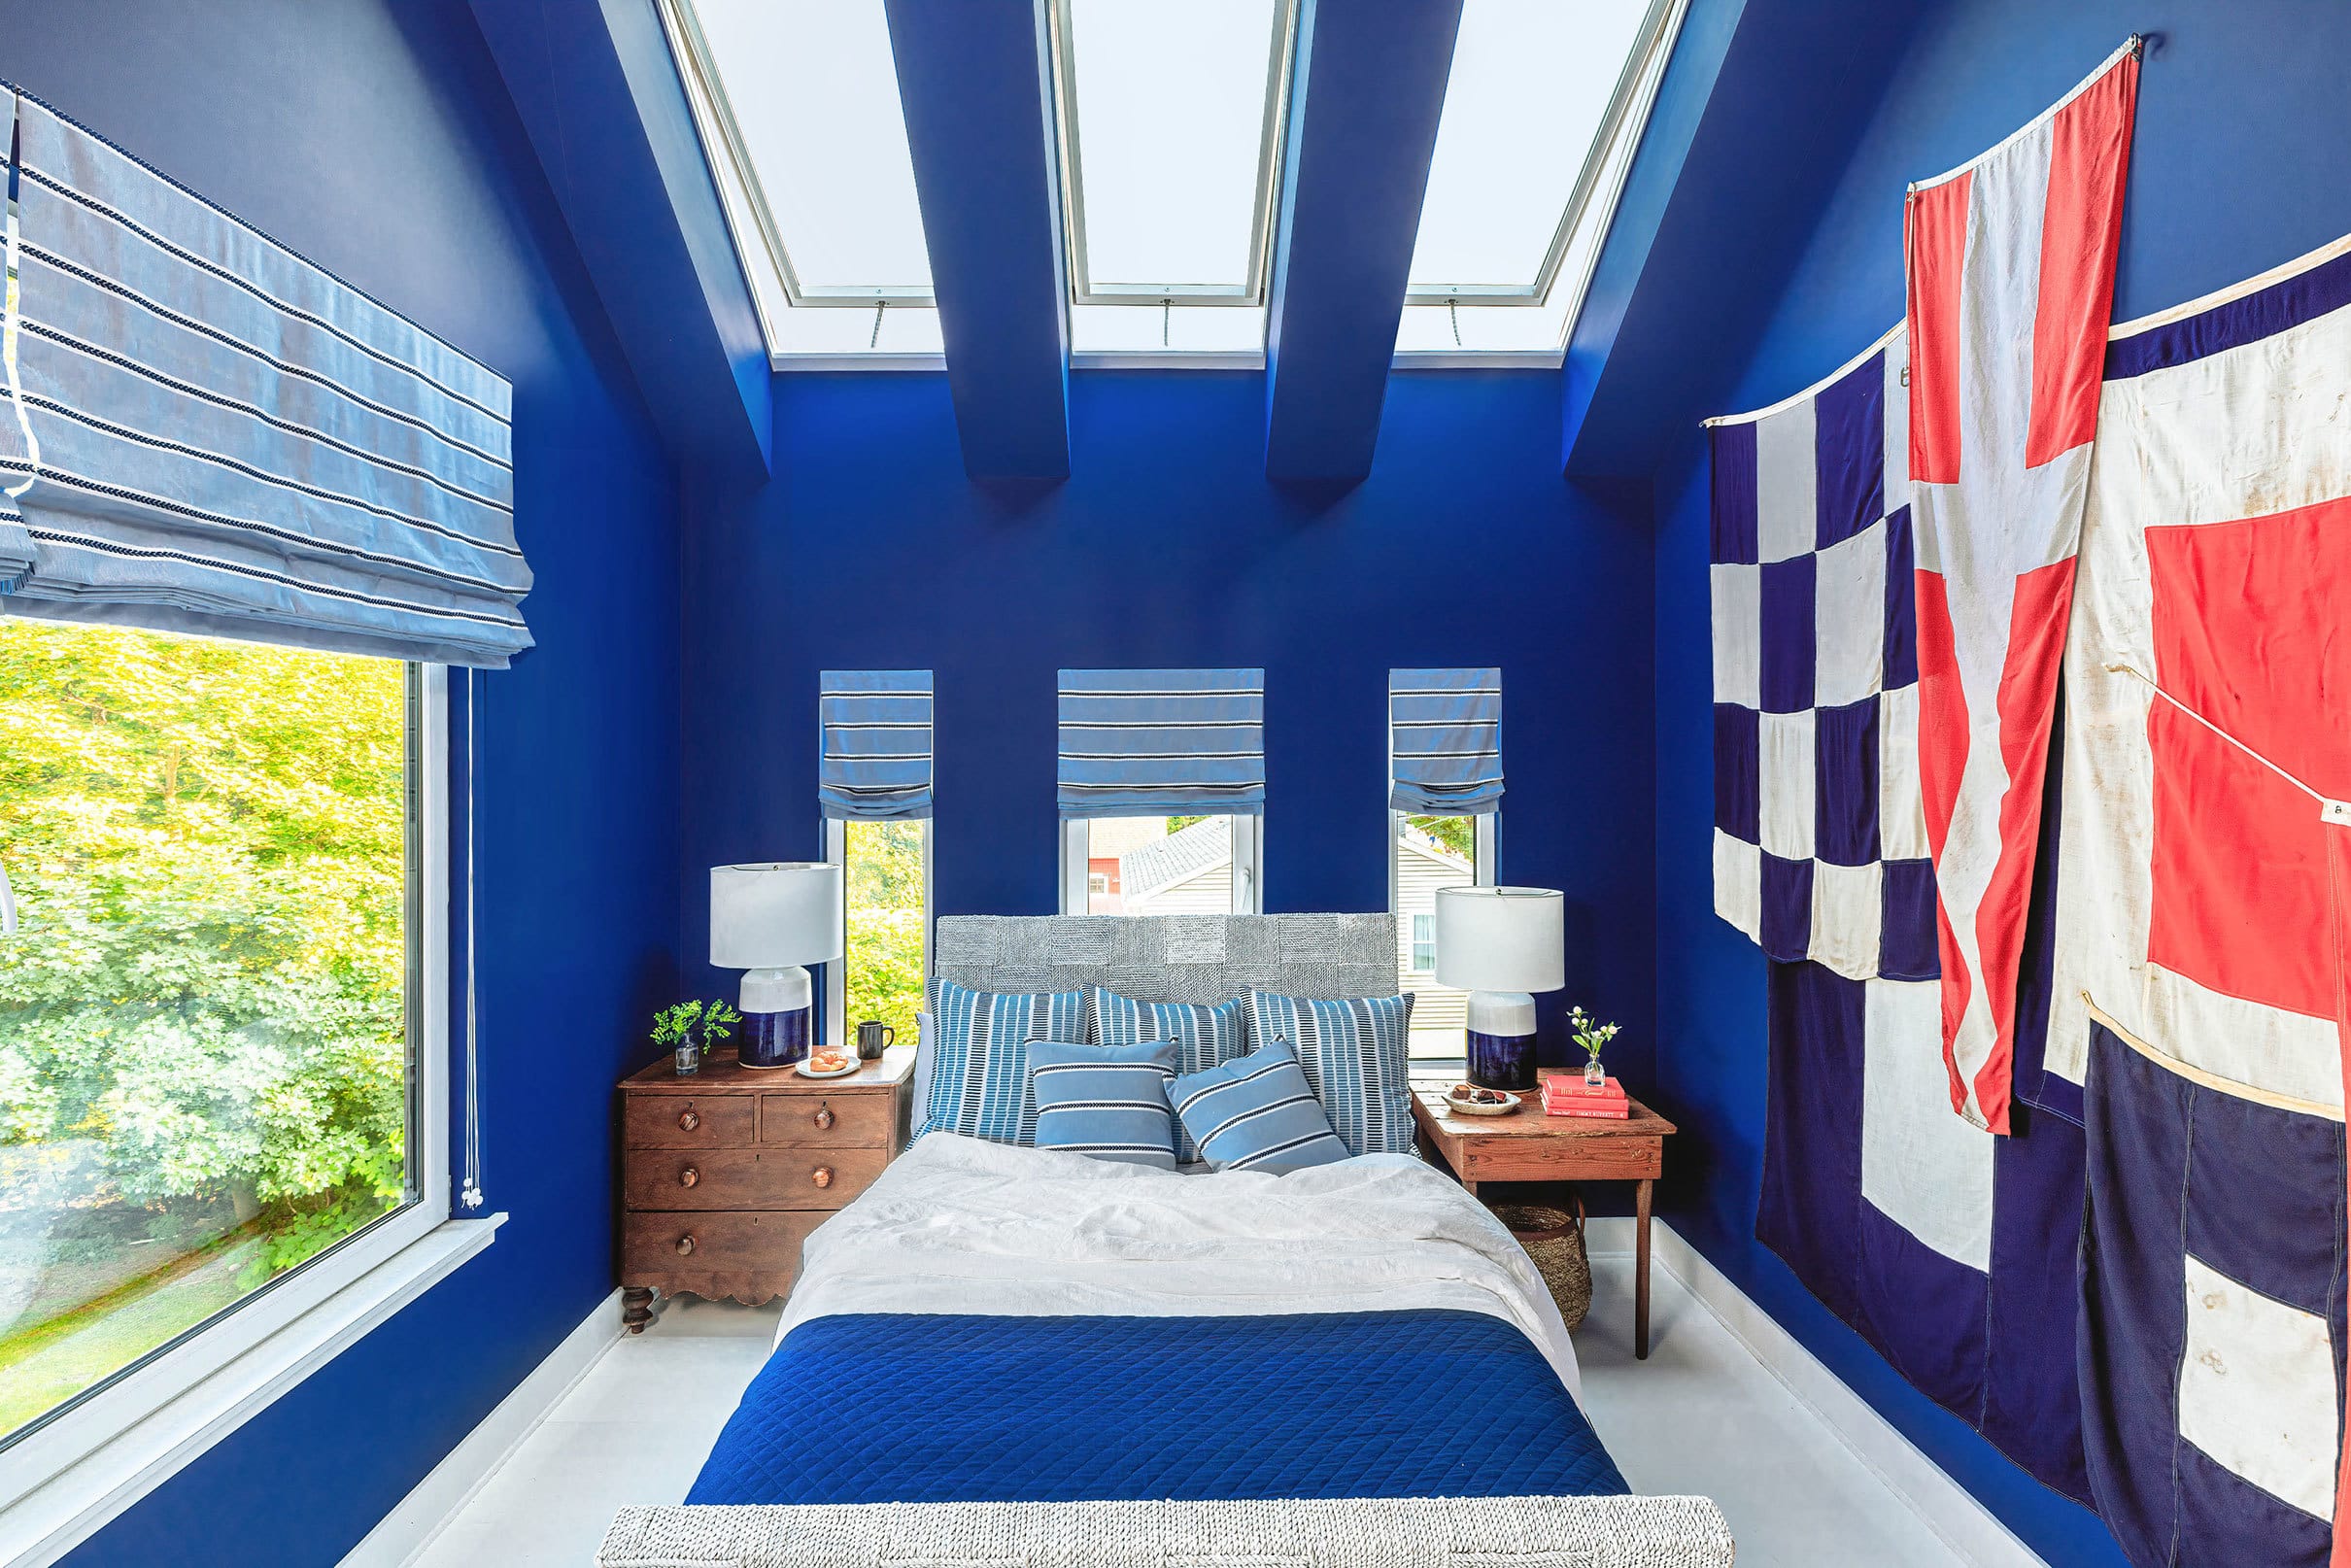 open skylights bring light into a blue bedroom with flags